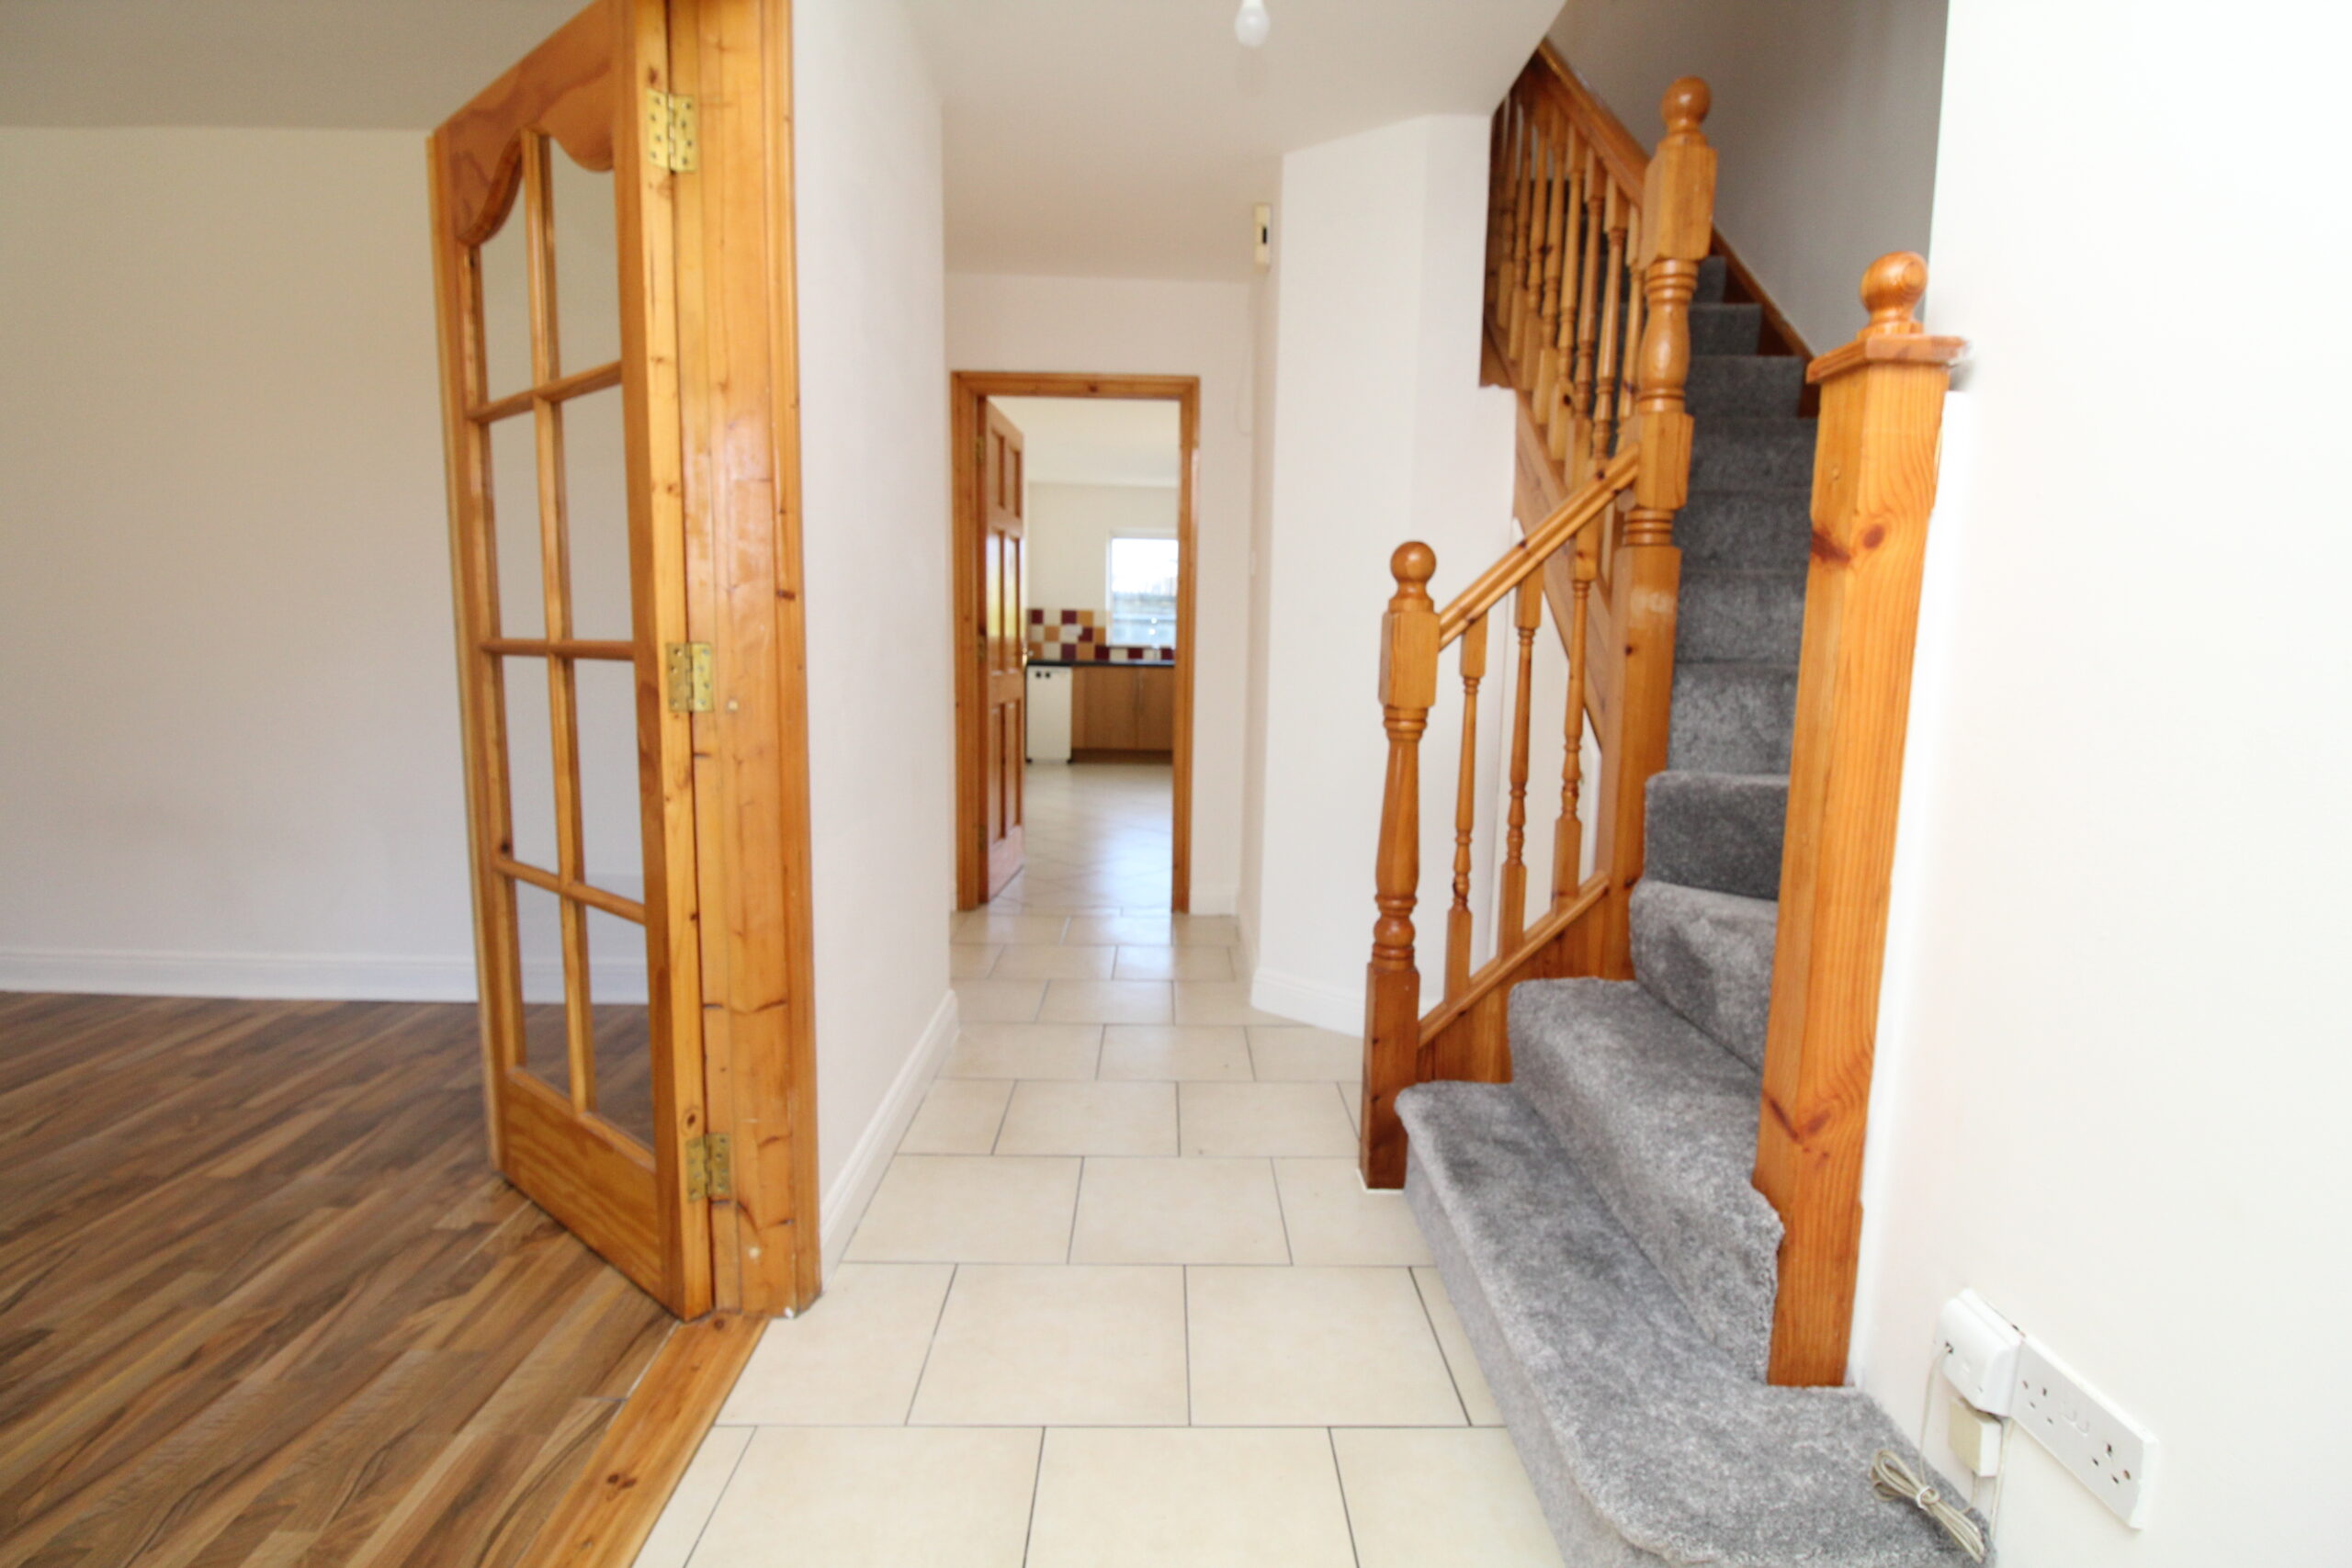 7 Cois Abhann, Caherweesheen, Tralee, Co. Kerry